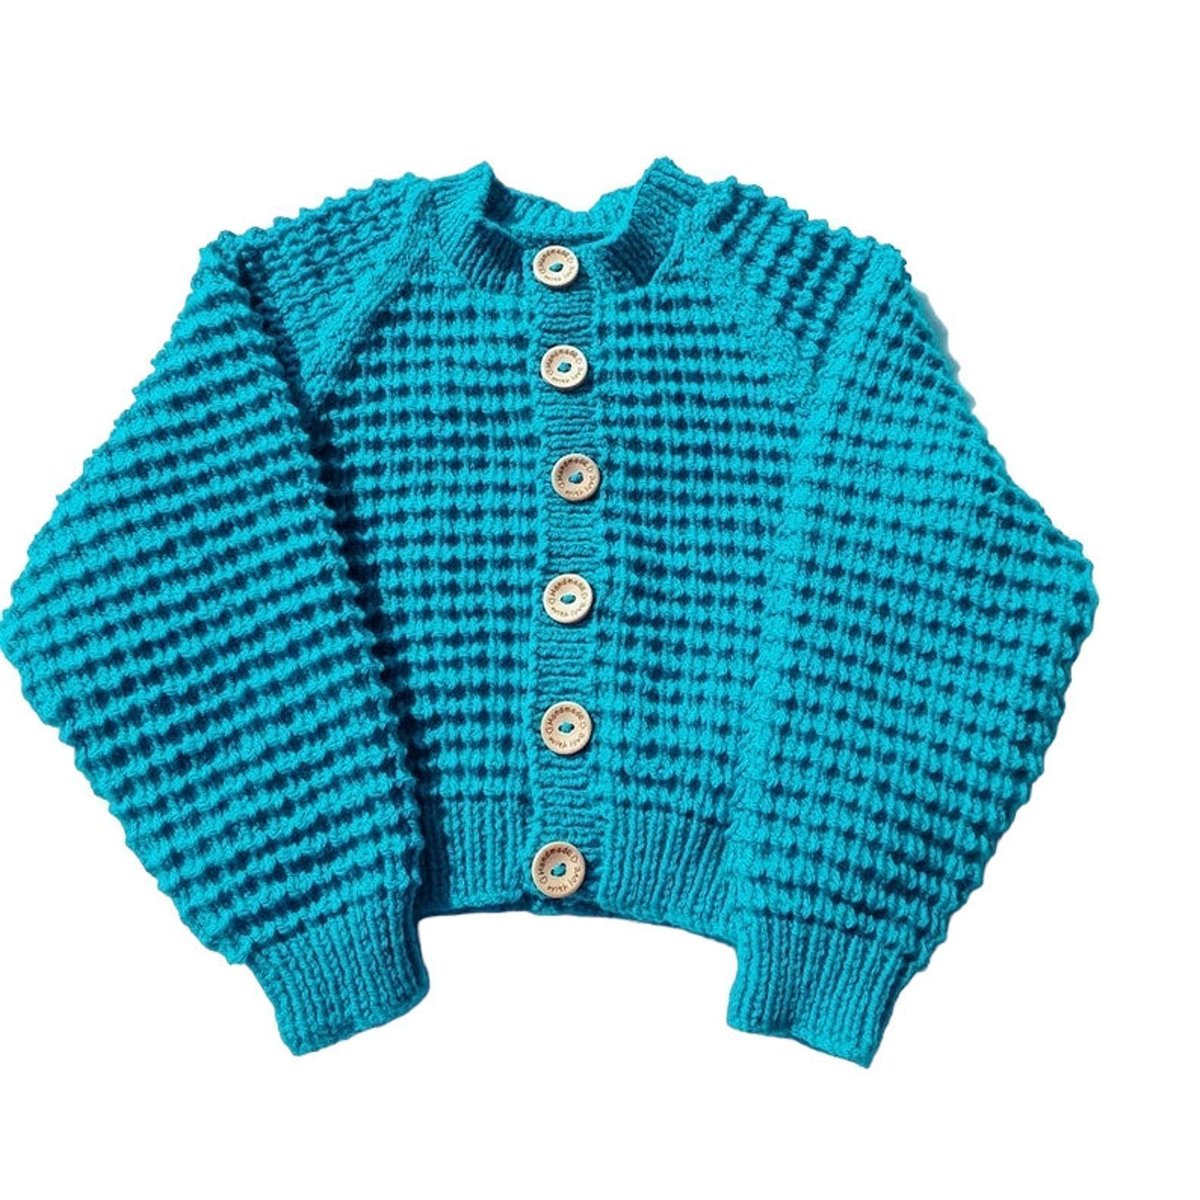 Brighten your child's day with this azure blue, stripe textured cardigan. Perfect for both boys and girls, it's a handmade treasure from my #Etsy shop, #Knittingtopia. Shop now: knittingtopia.etsy.com/listing/169305… #craftbizparty #MHHSBD #uksmallbiz #shophandmade